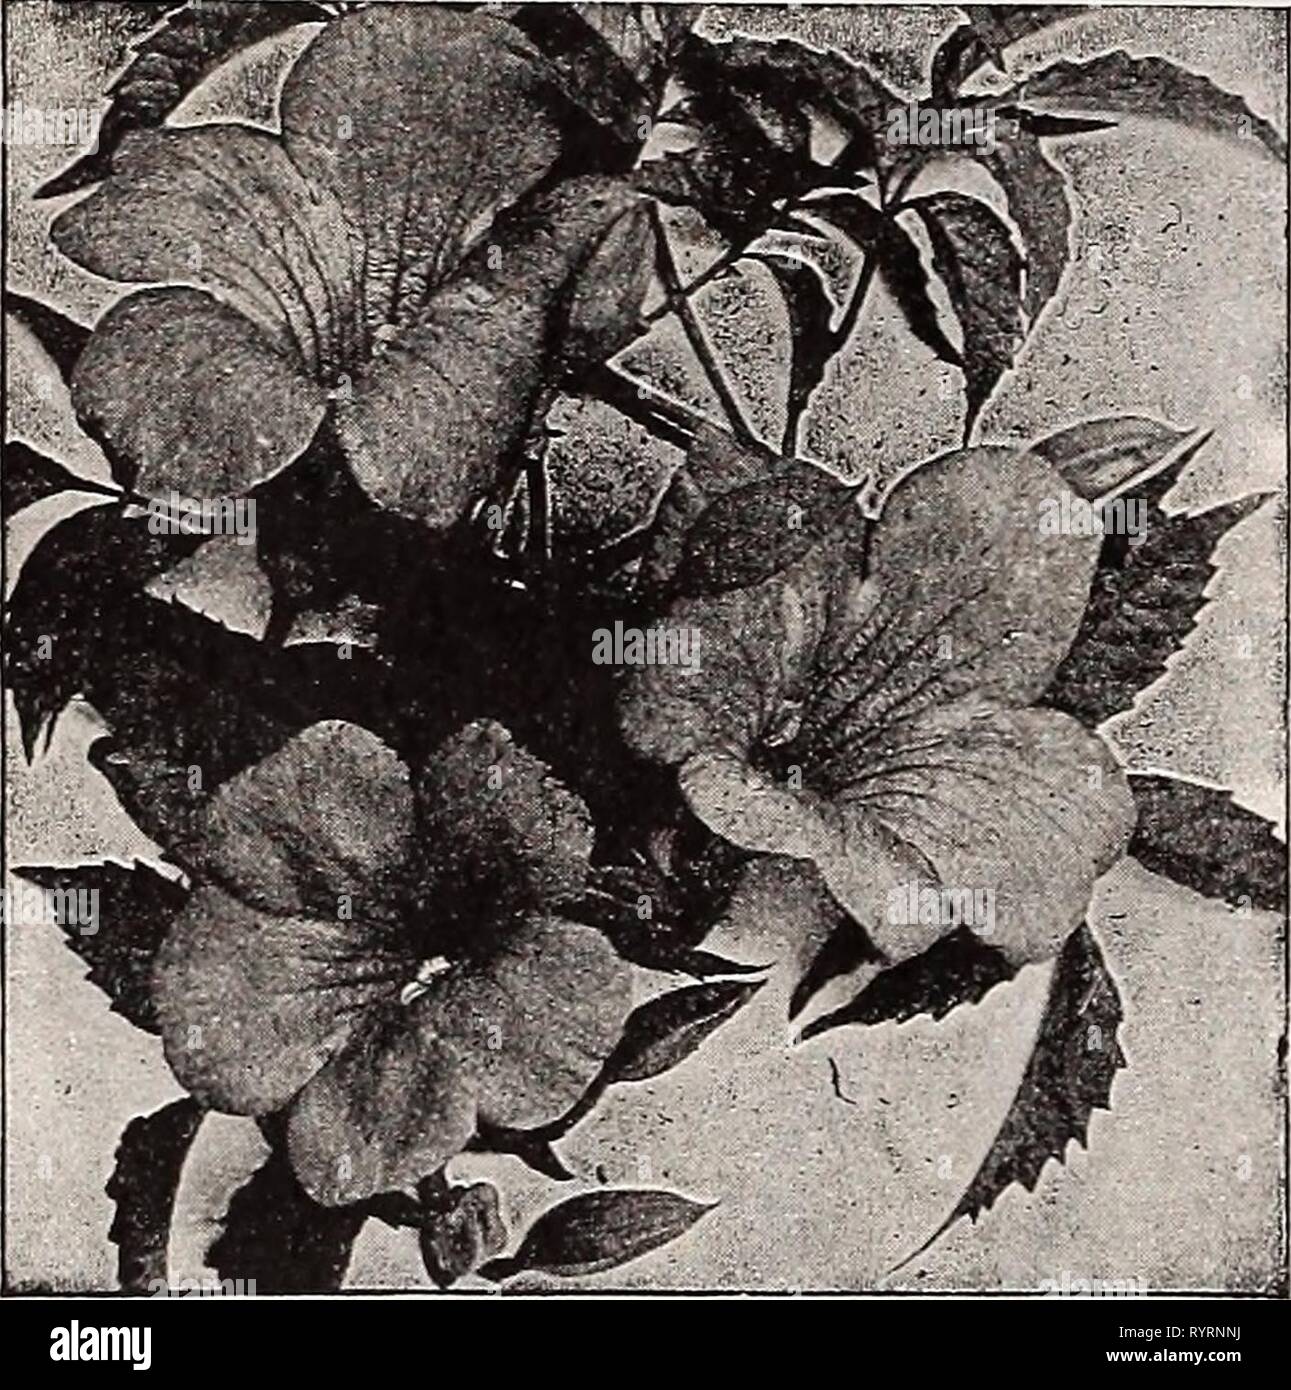 Dreer's wholesale catalog for florists Dreer's wholesale catalog for florists : autumn 1938 edition . dreerswholesalec1938henr Year: 1938  HENRY A. DREER Dreer's Select WHOLESALE CATAL ^ Hardy Vines and Climbers Actinidia—Silver Vine Argrata. Strong two-year-old plants, $4.00 per doz.; $30.00 per 100. Akebia quinata—Akebia Vine strong two-year-old plants, $2.75 per doz.; $18.00 per 100. Ampelopsis Lowi The miniature-leaved form of Ampelopsis Veitchi. 3-inch pots, $4.00 per doz.; $30.00 per 100. Ampelopsis quinquefolia Virginia Creeper, American Ivy strong two-year-old plants, $2.75 per doz.; $ Stock Photo